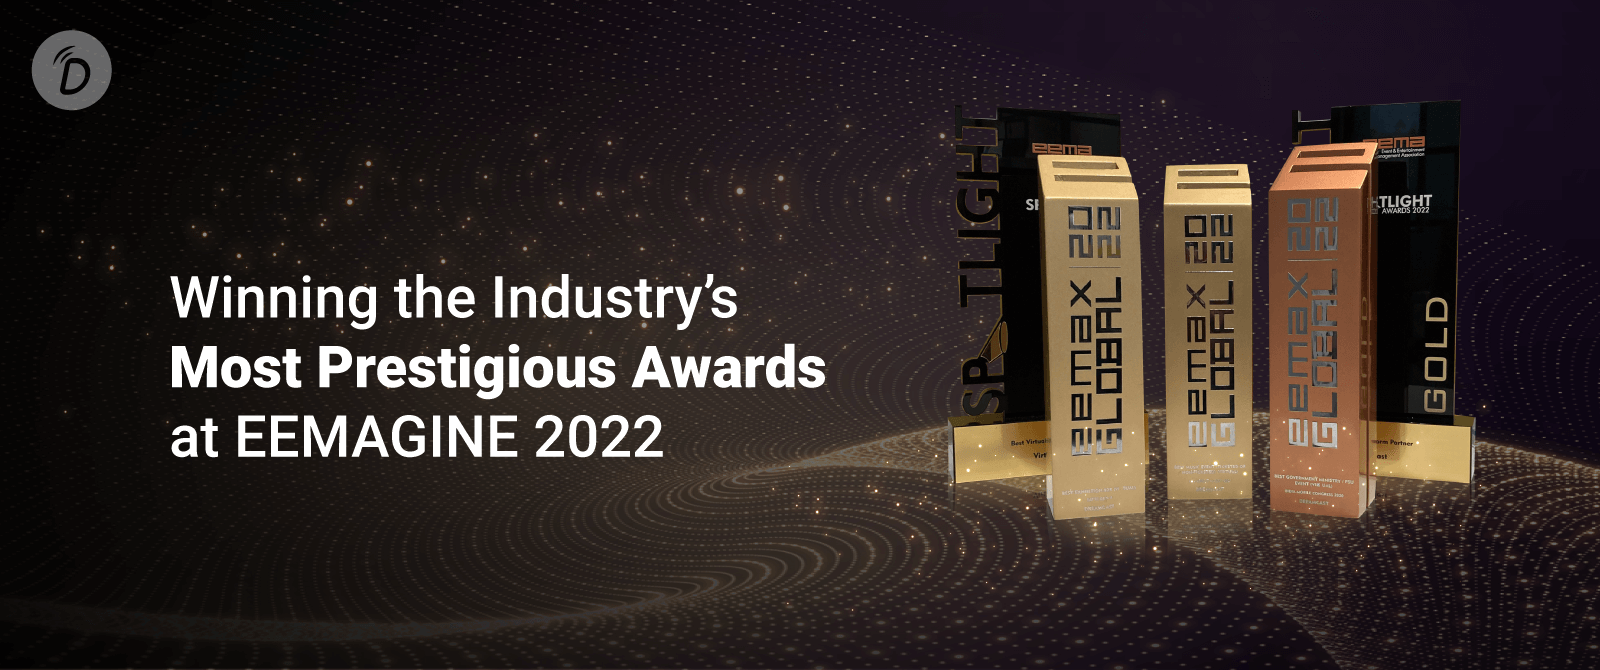 Winning the Industry’s Most Prestigious Awards at EEMAGINE 2022